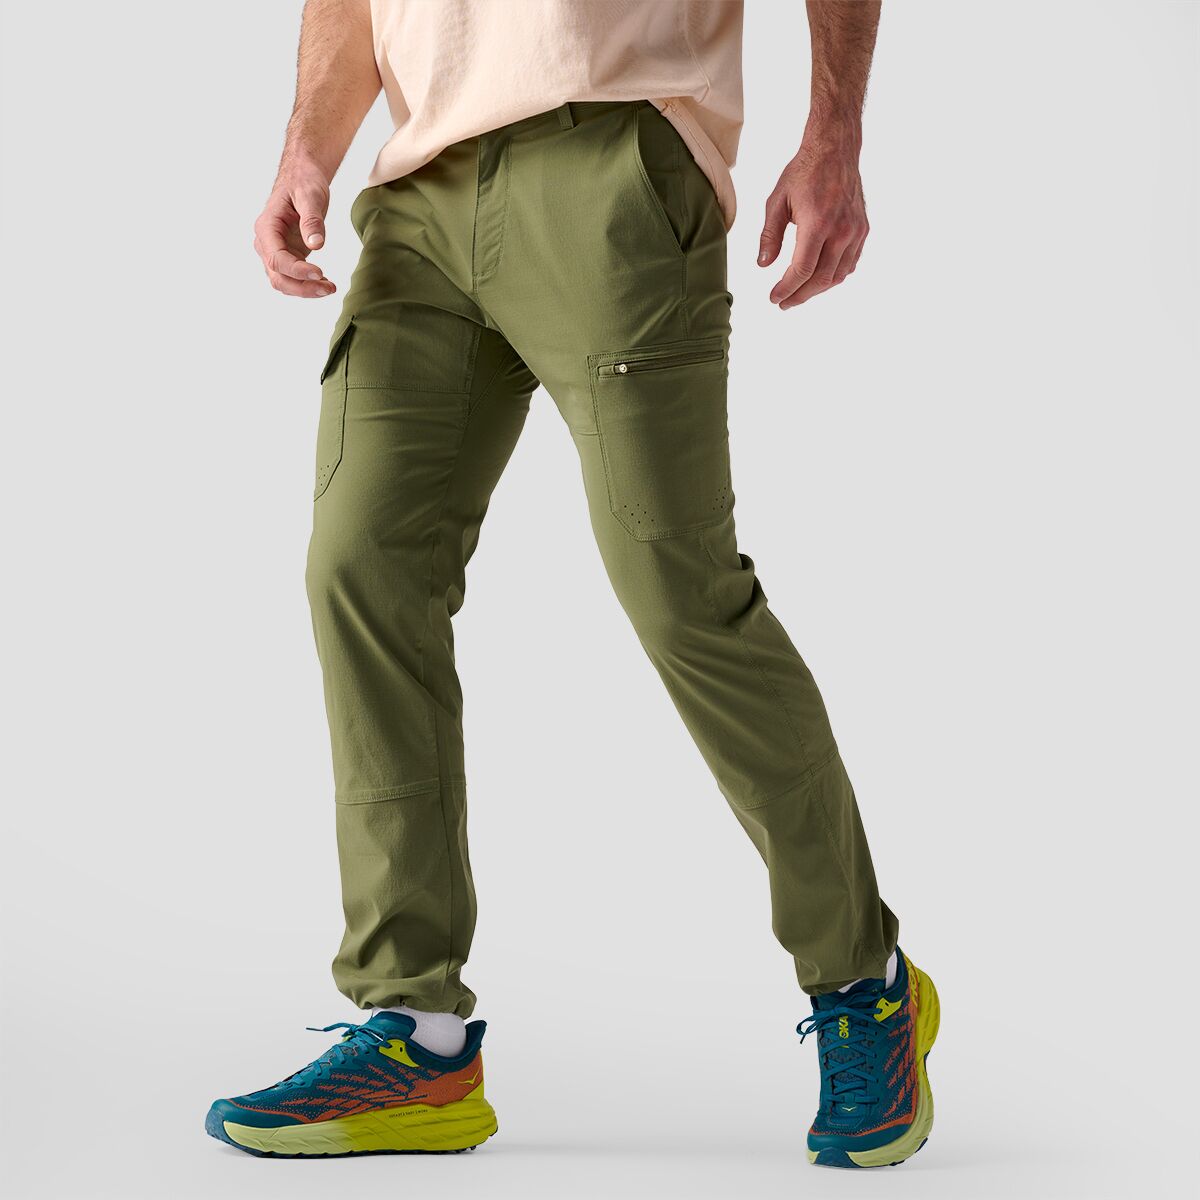 Backcountry Wasatch Ripstop Trail Pant - Men's